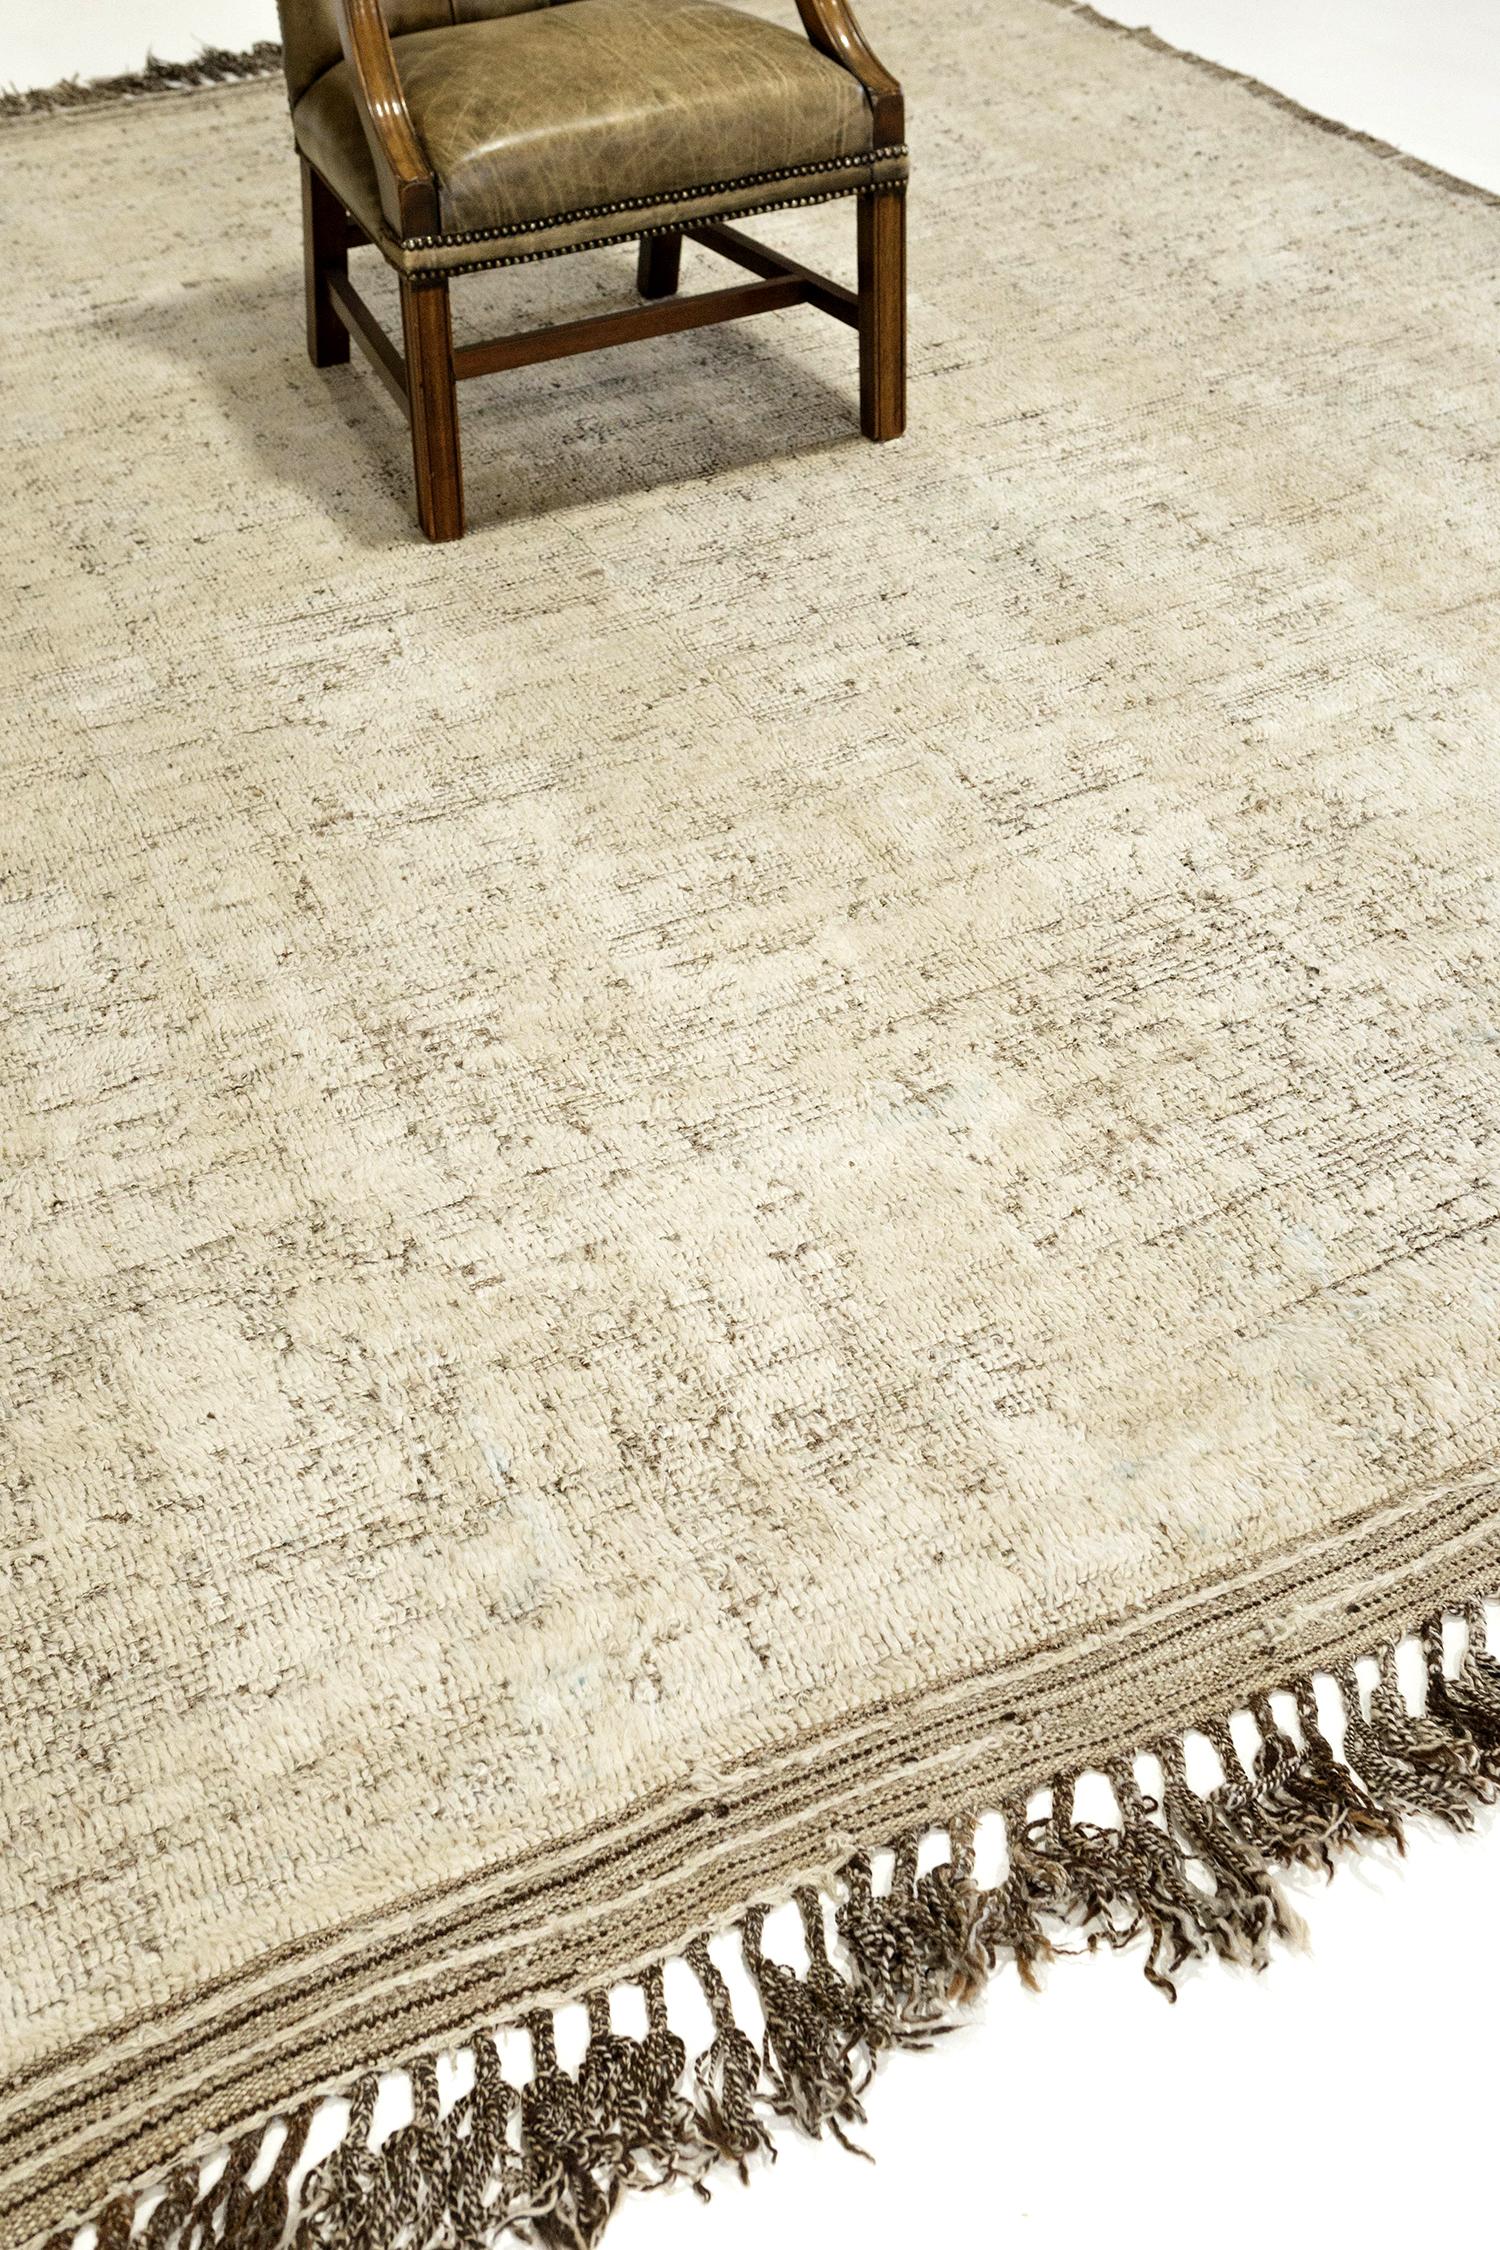 'Talassemtane' is a beautifully textured rug with muted irregular motifs inspired from the Atlas Mountains of Morocco. Golden tan colors surrounded by the perfect ivory shag work cohesively to make for a great contemporary interpretation for the